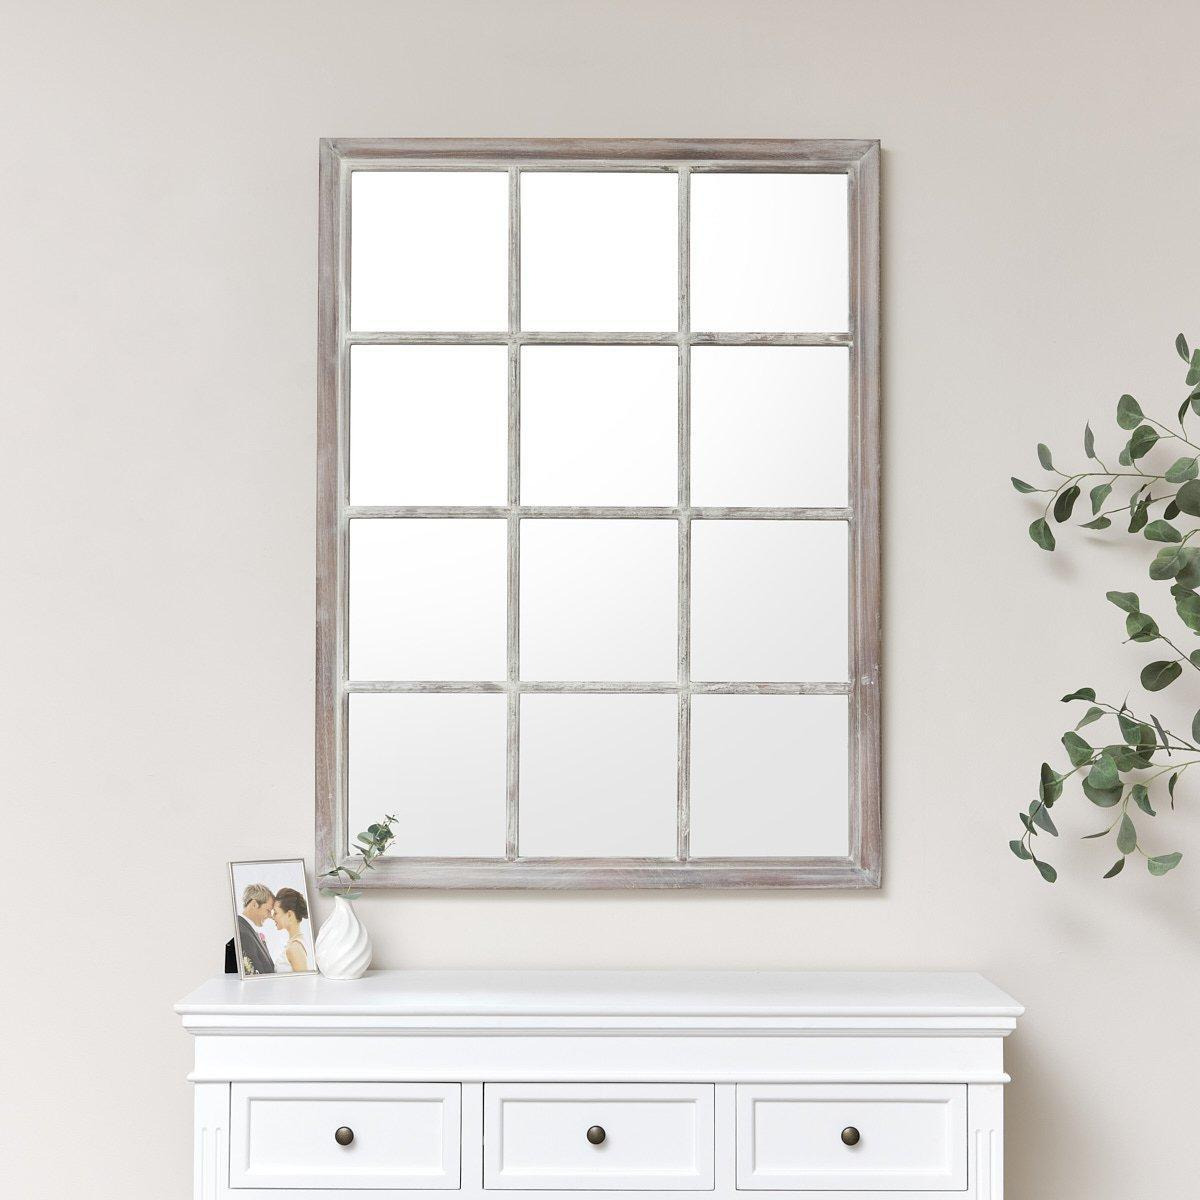 Large Rustic Wooden Window Wall Mirror 120cm X 90cm - image 1